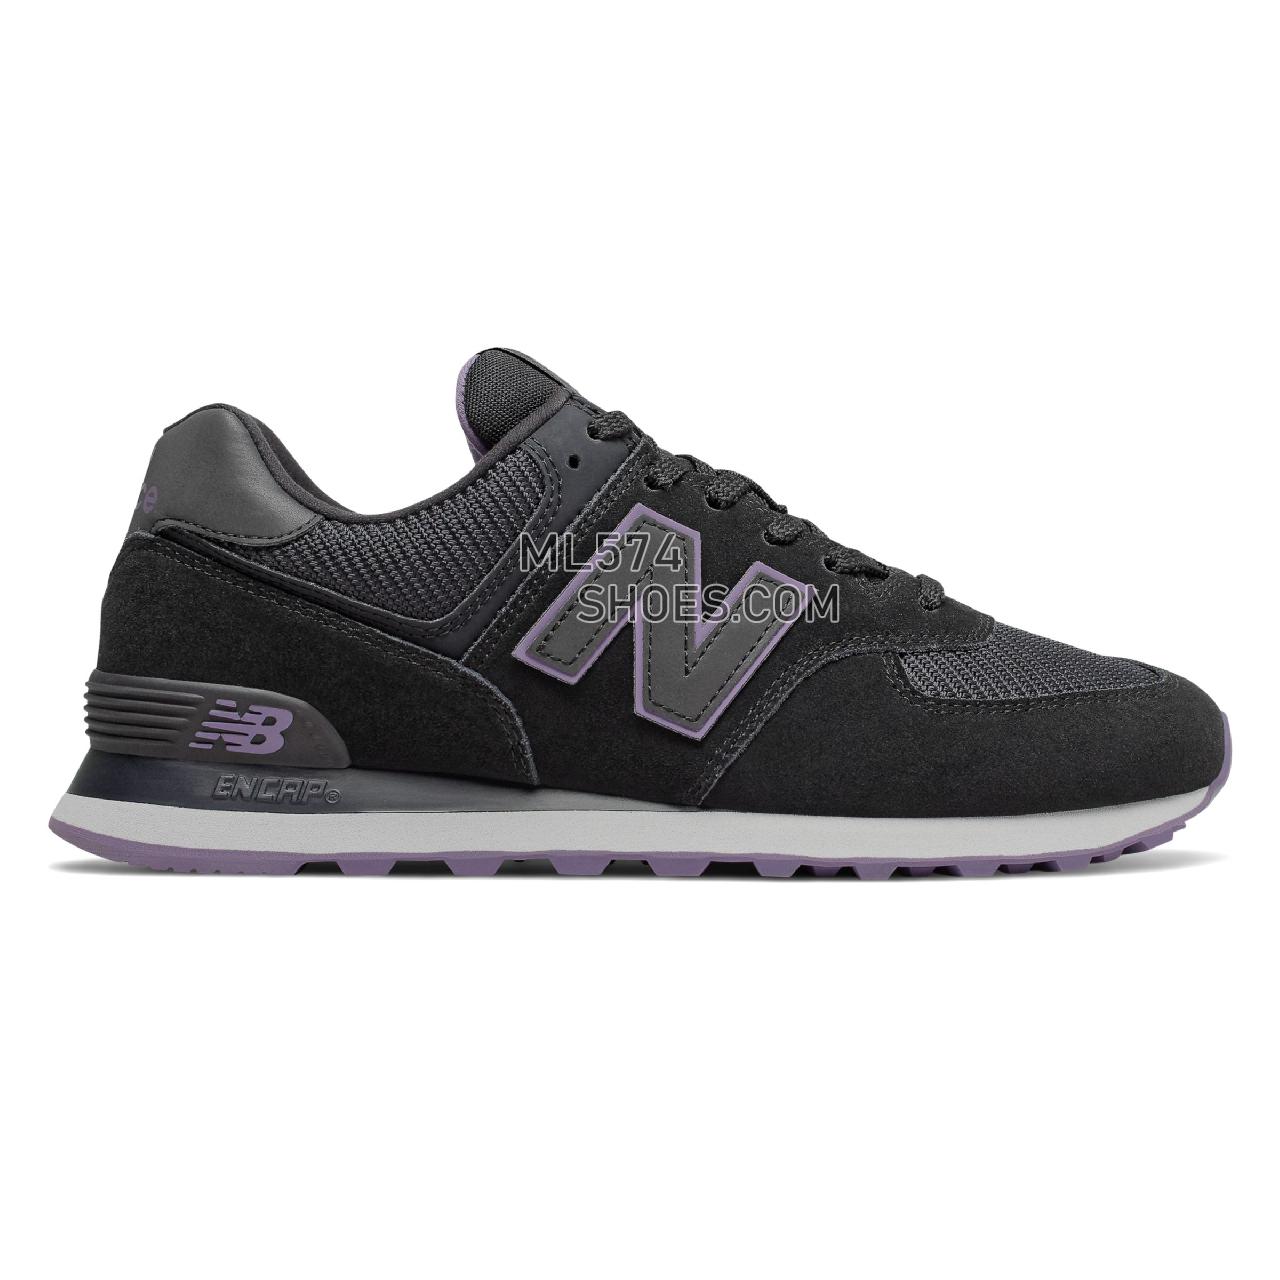 New Balance 574 - Men's Classic Sneakers - Black with Magnet - ML574JHK